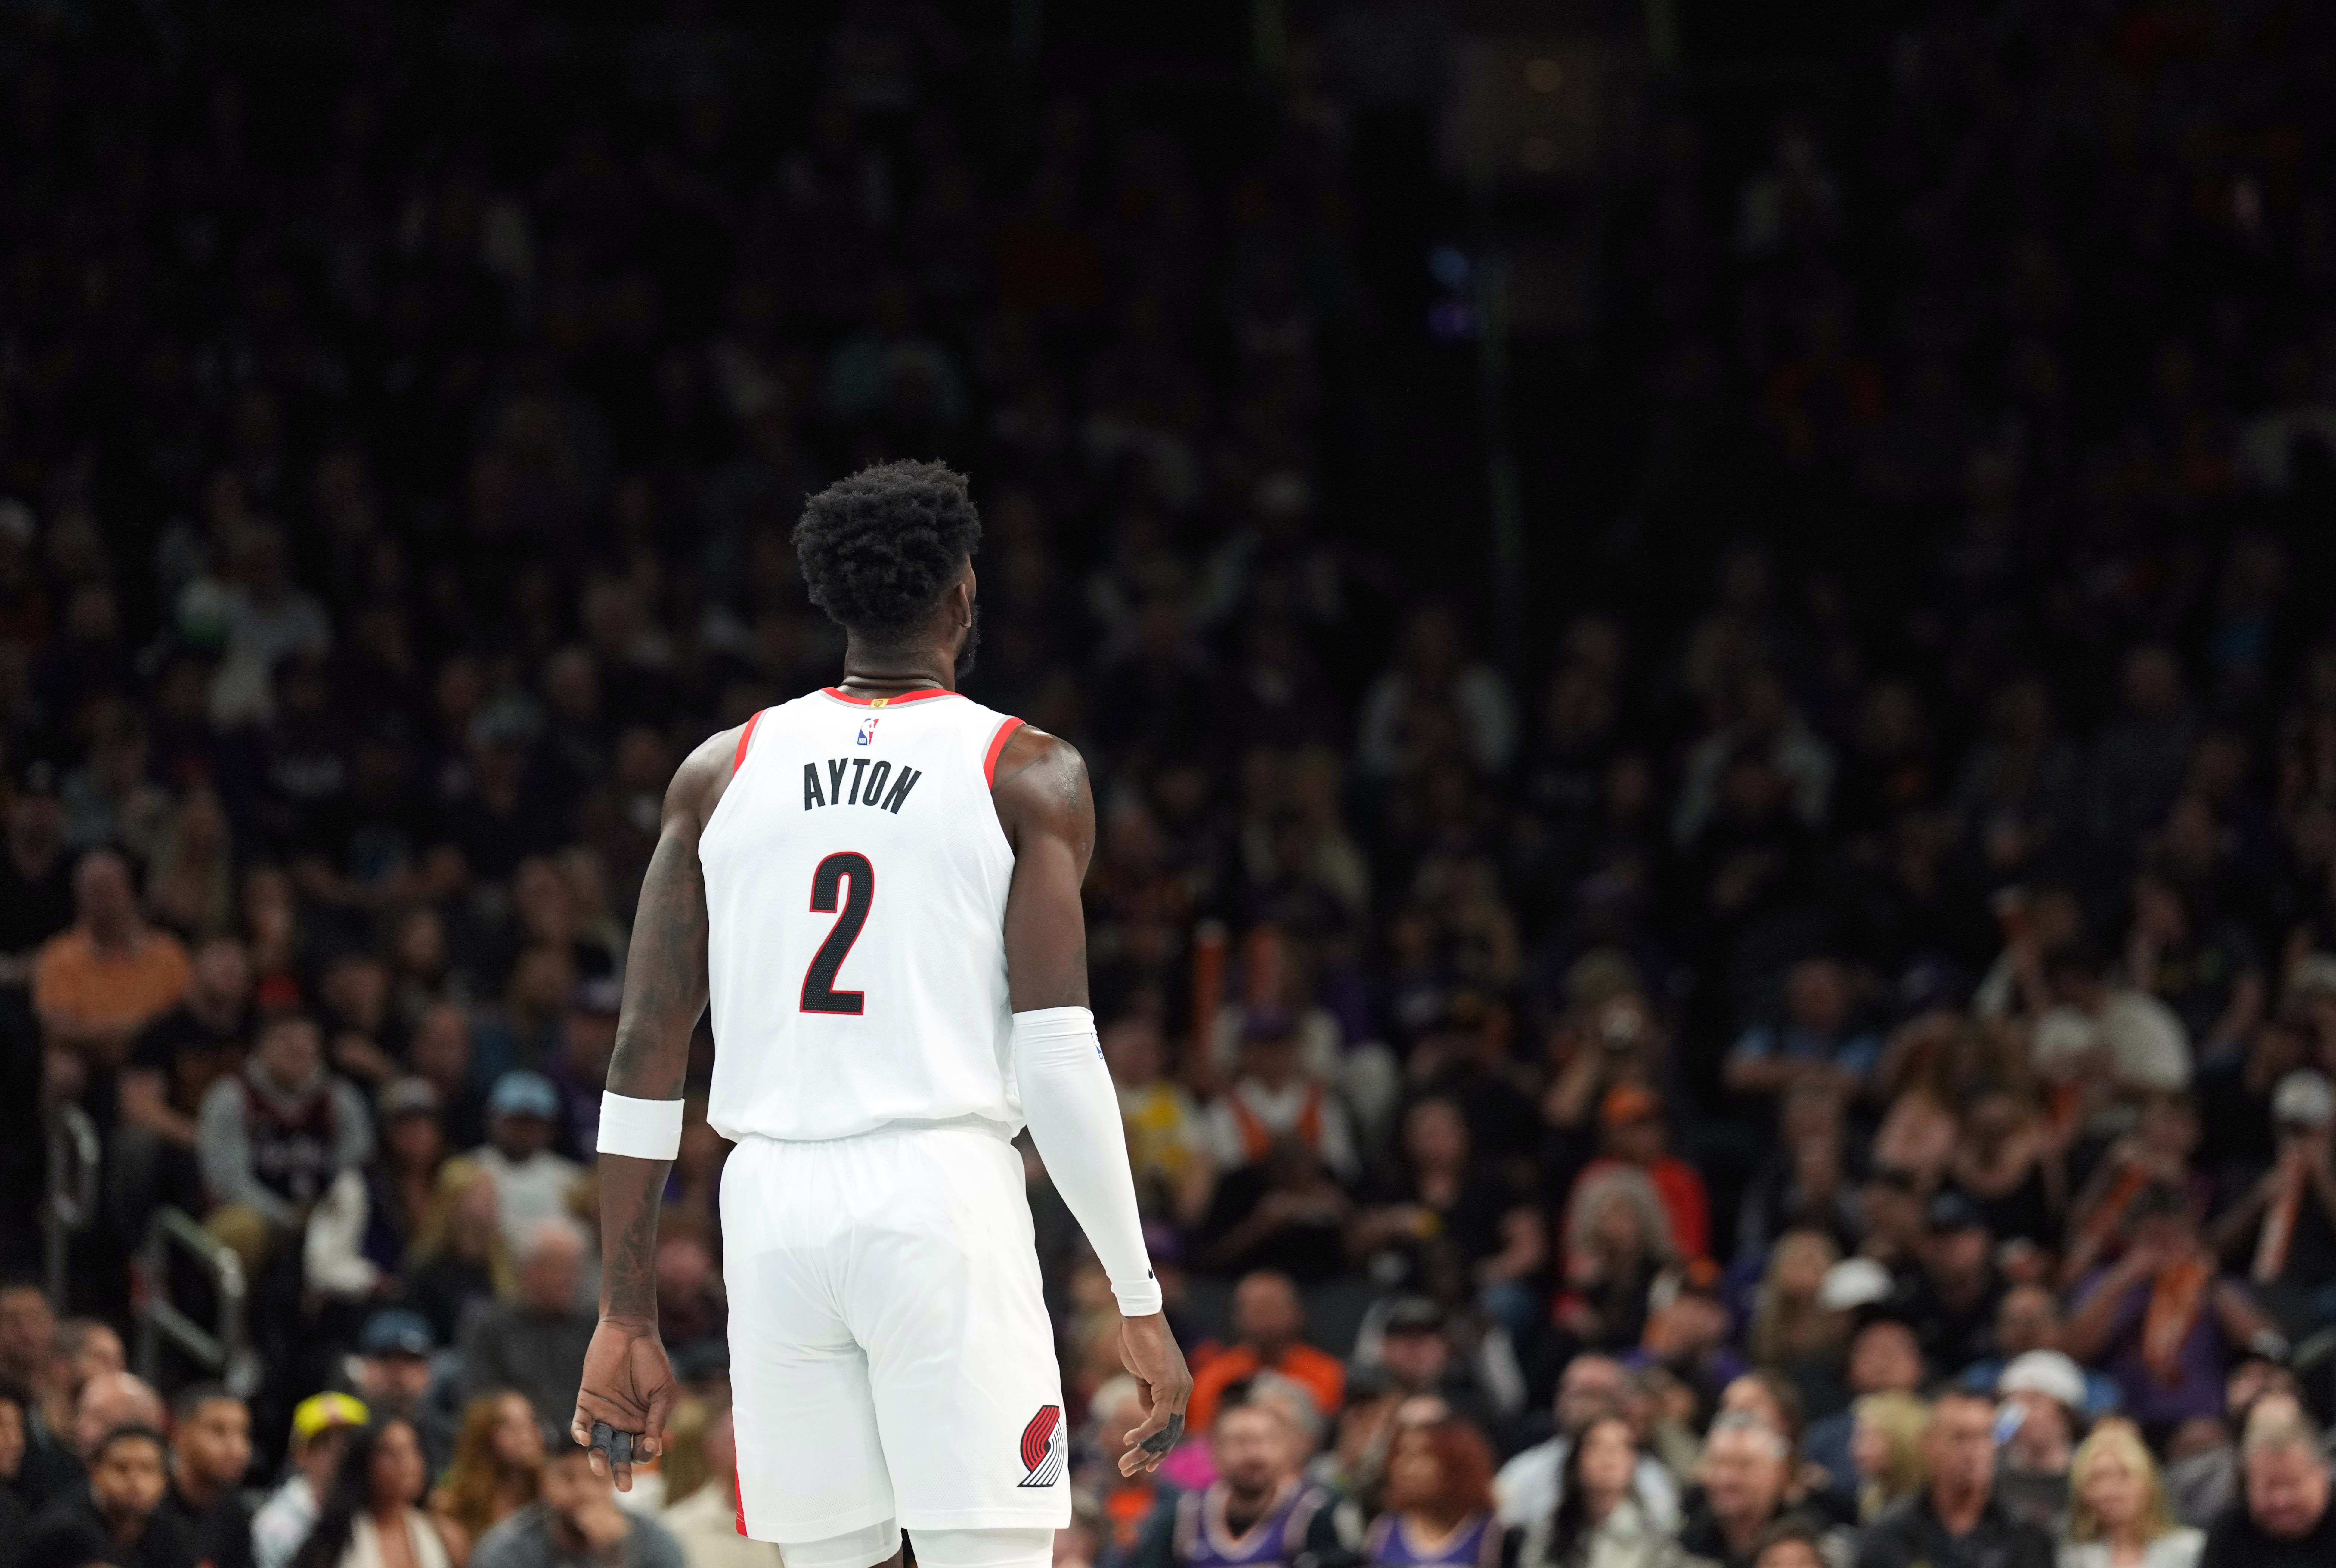 Deandre Ayton's first game back in Phoenix confirmed everything we knew about the Suns' decision to trade for Jusuf Nurkic